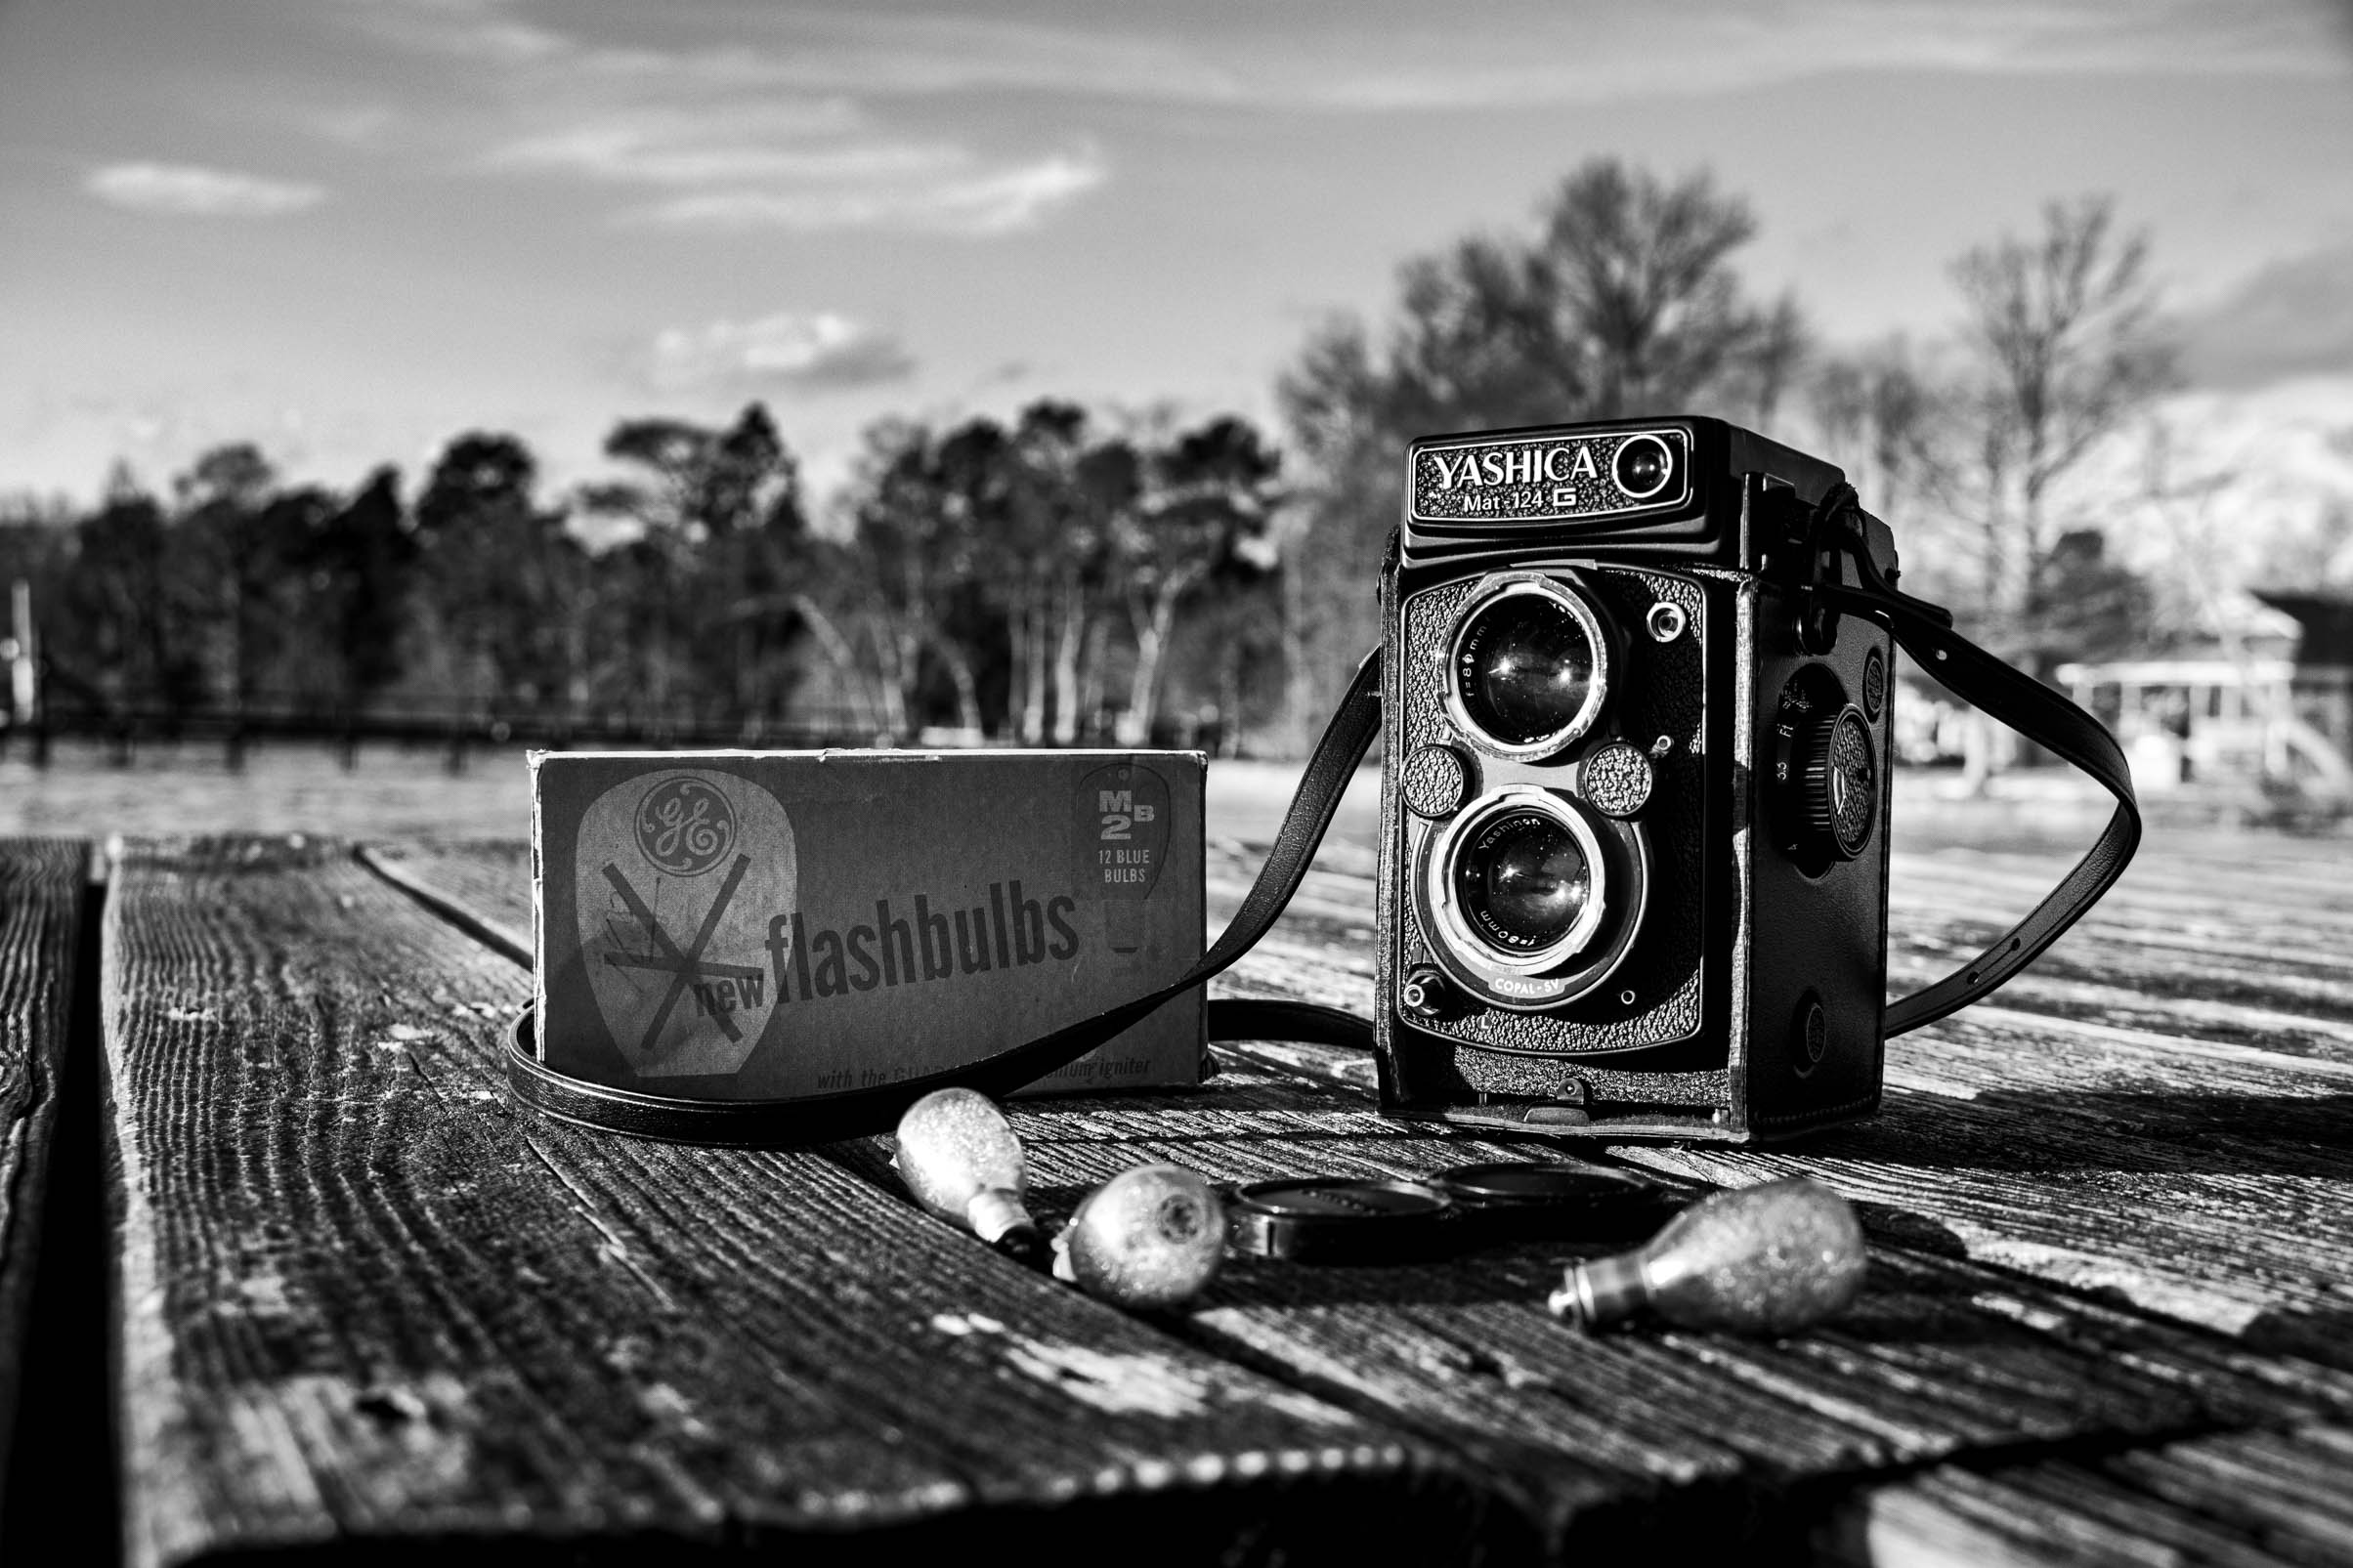 So You Have A Camera - Now What?